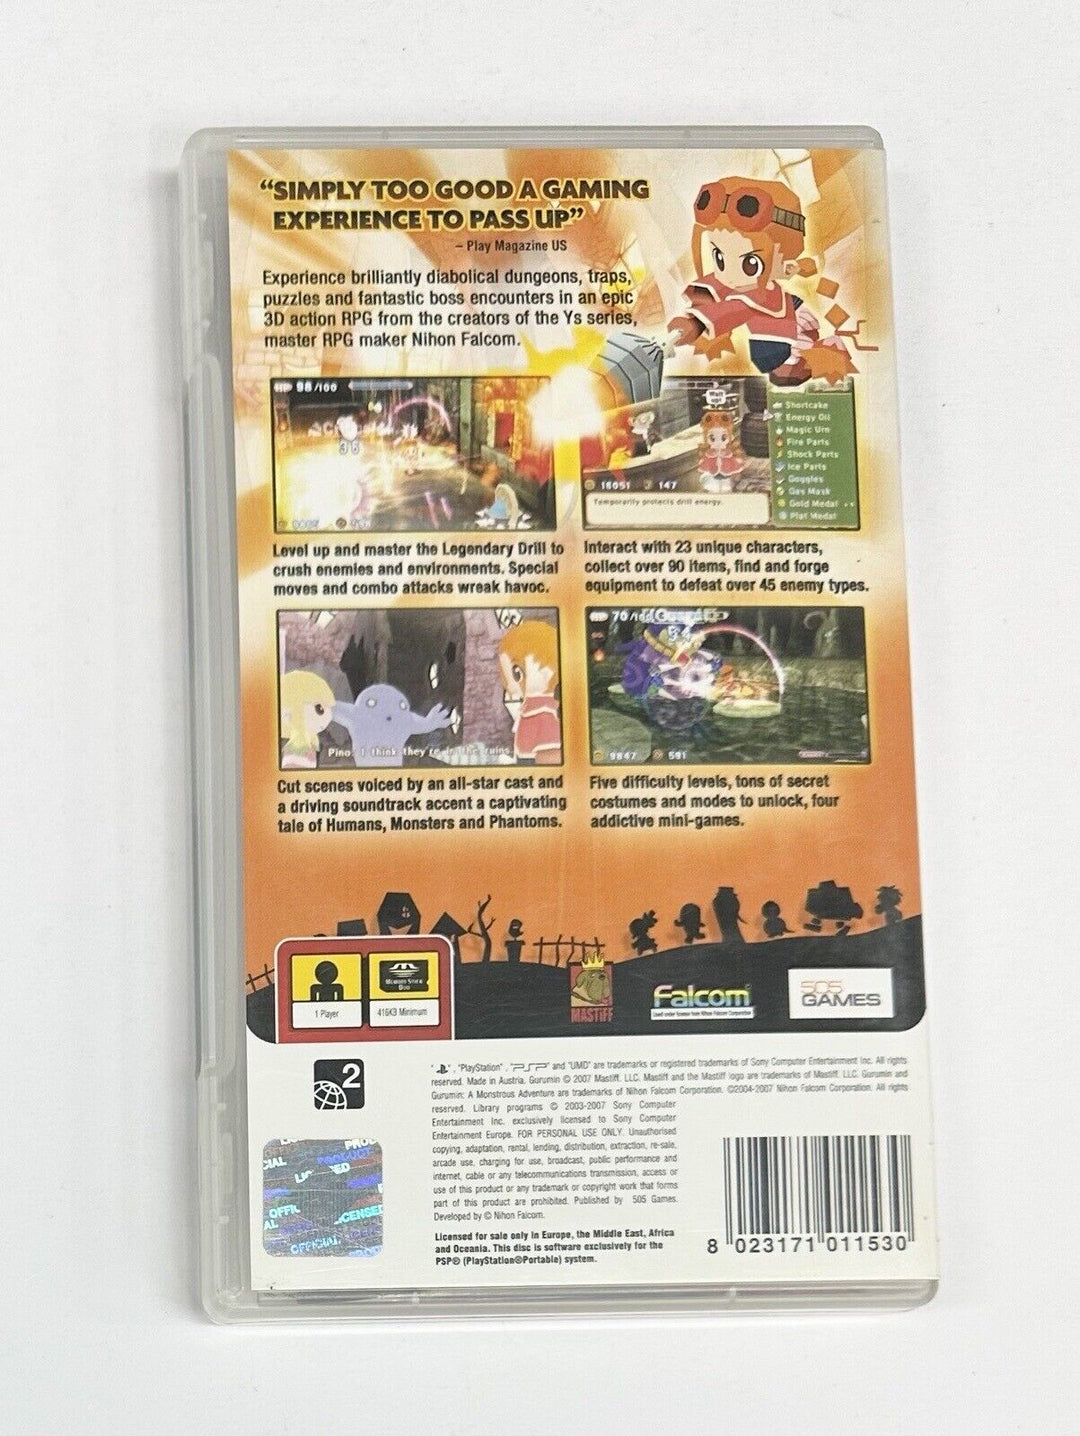 Gurumin: A Monstrous Adventure - PlayStation Portable / PSP Game - FREE POST!